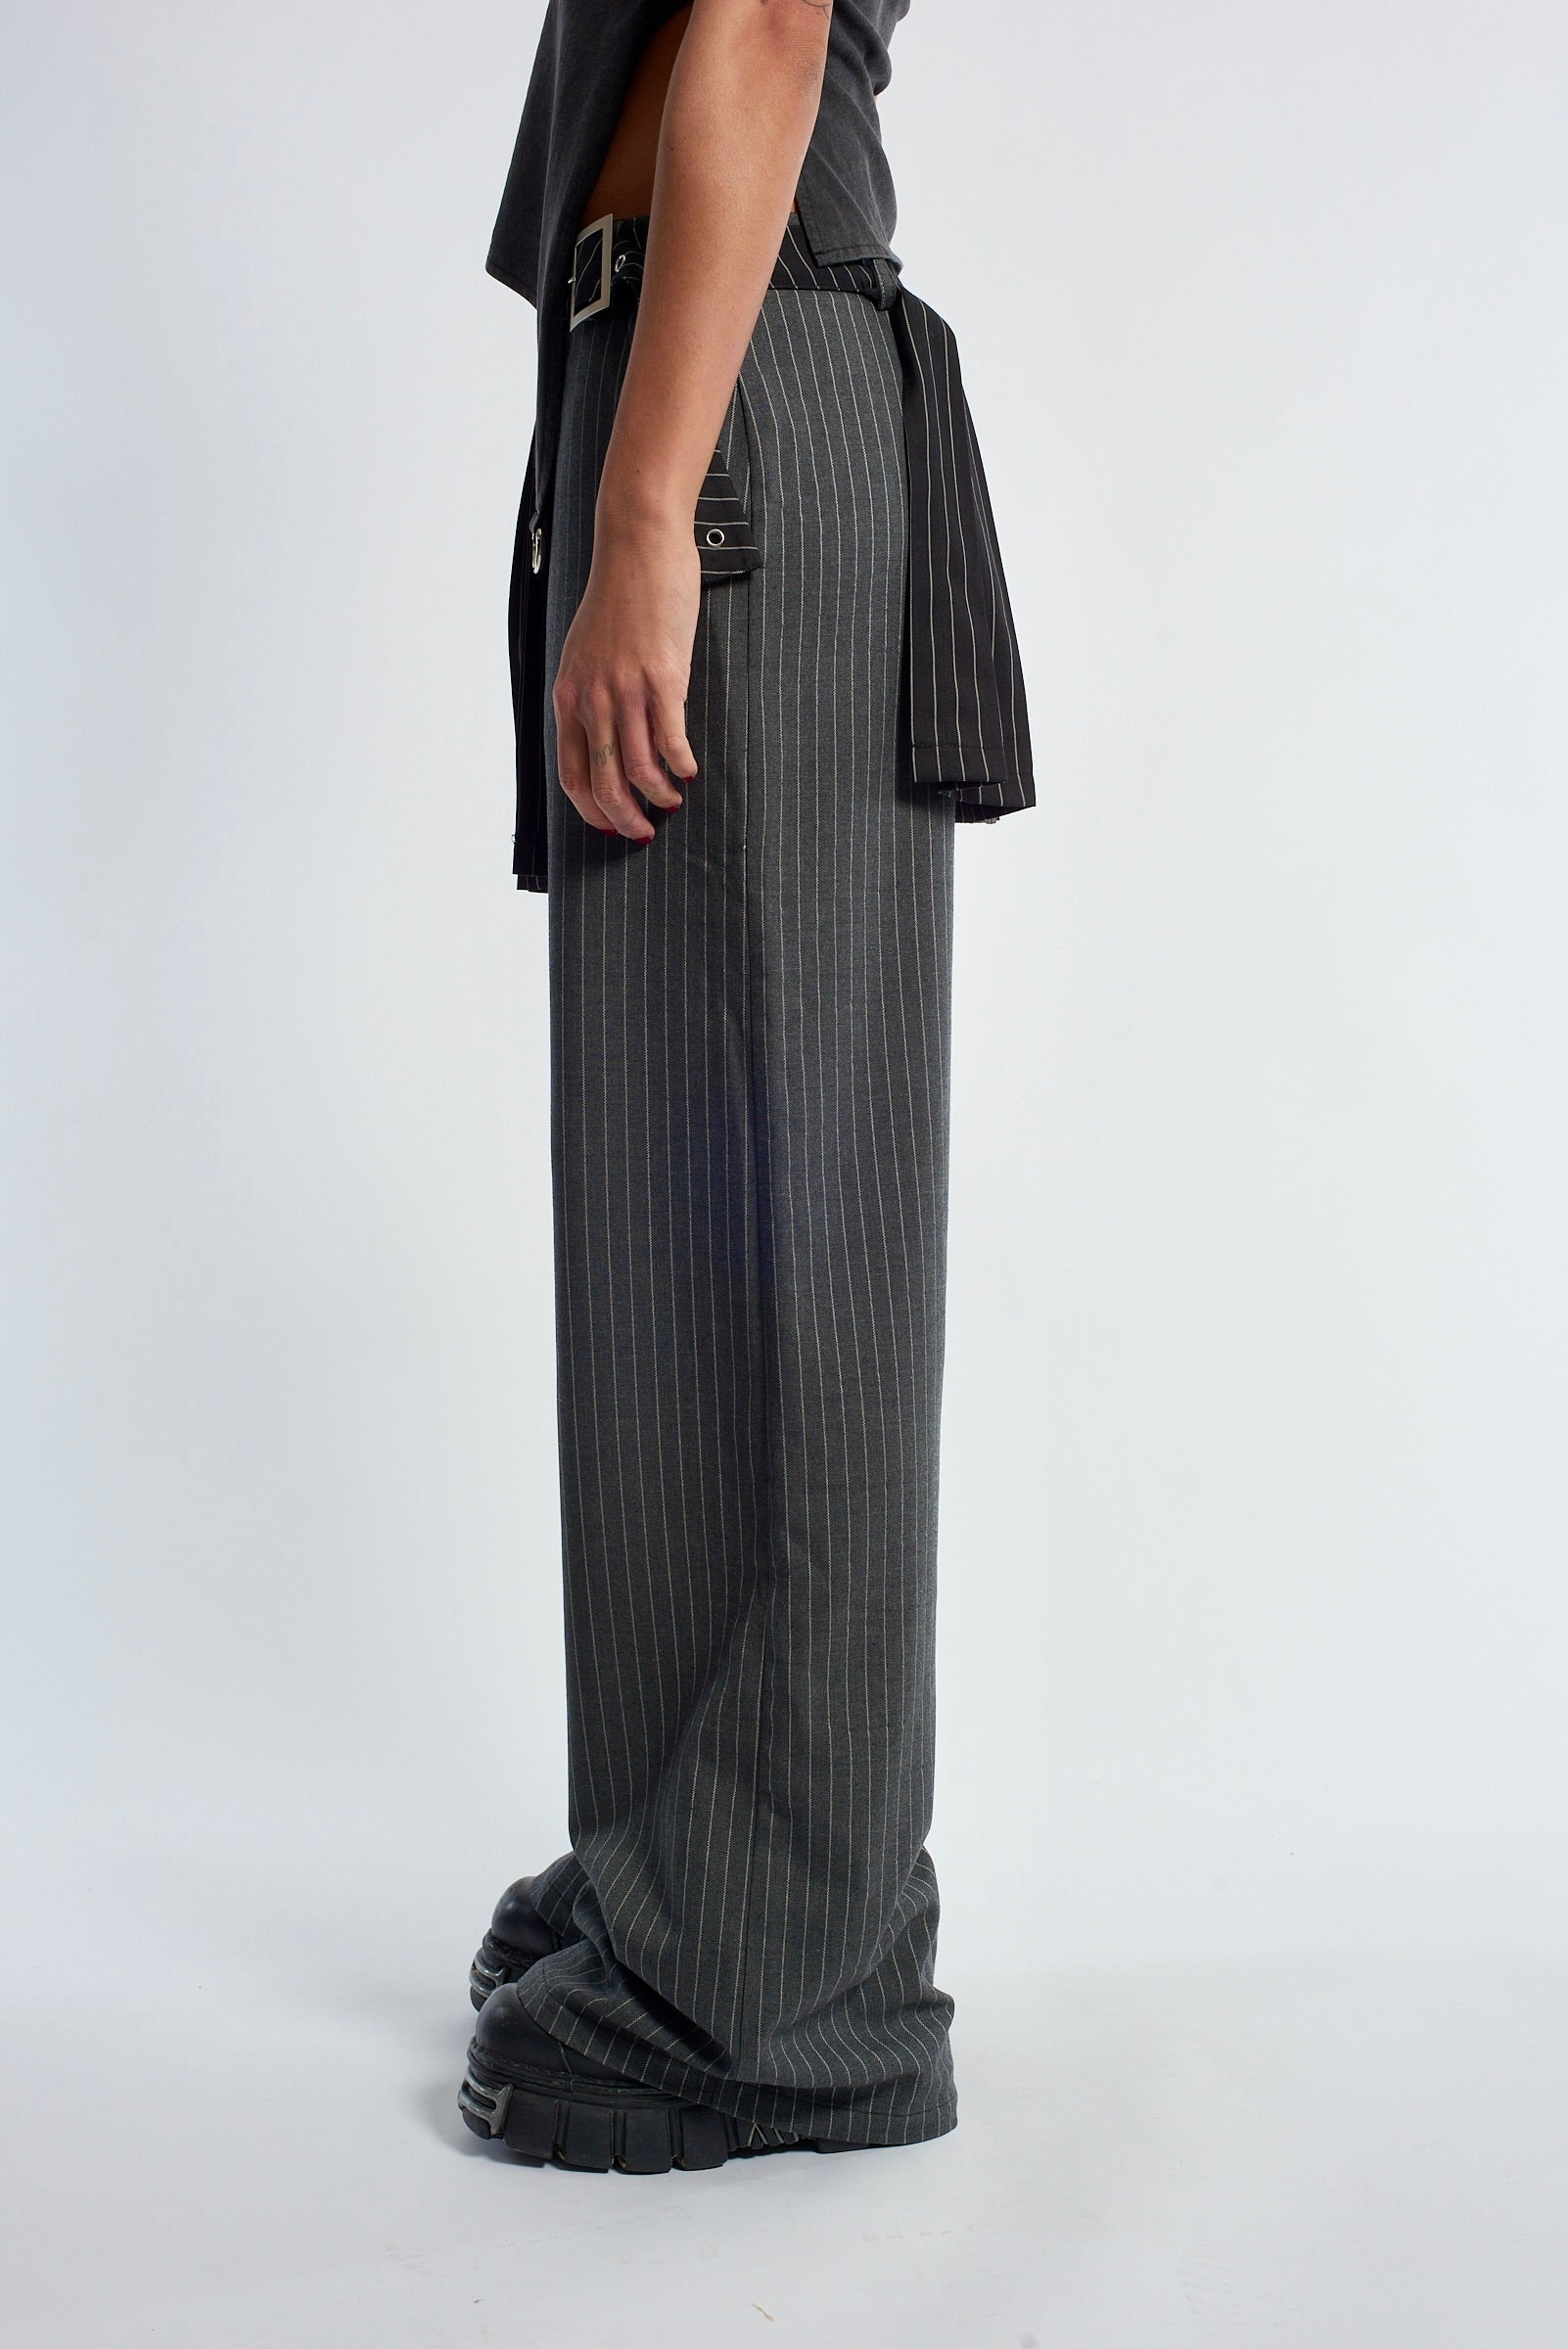 REMOTE PINSTRIPE SKIRT OVER TROUSER - EXCLUSIVE Pants from THE RAGGED PRIEST - Just €89! SHOP NOW AT IAMINHATELOVE BOTH IN STORE FOR CYPRUS AND ONLINE WORLDWIDE @ IAMINHATELOVE.COM